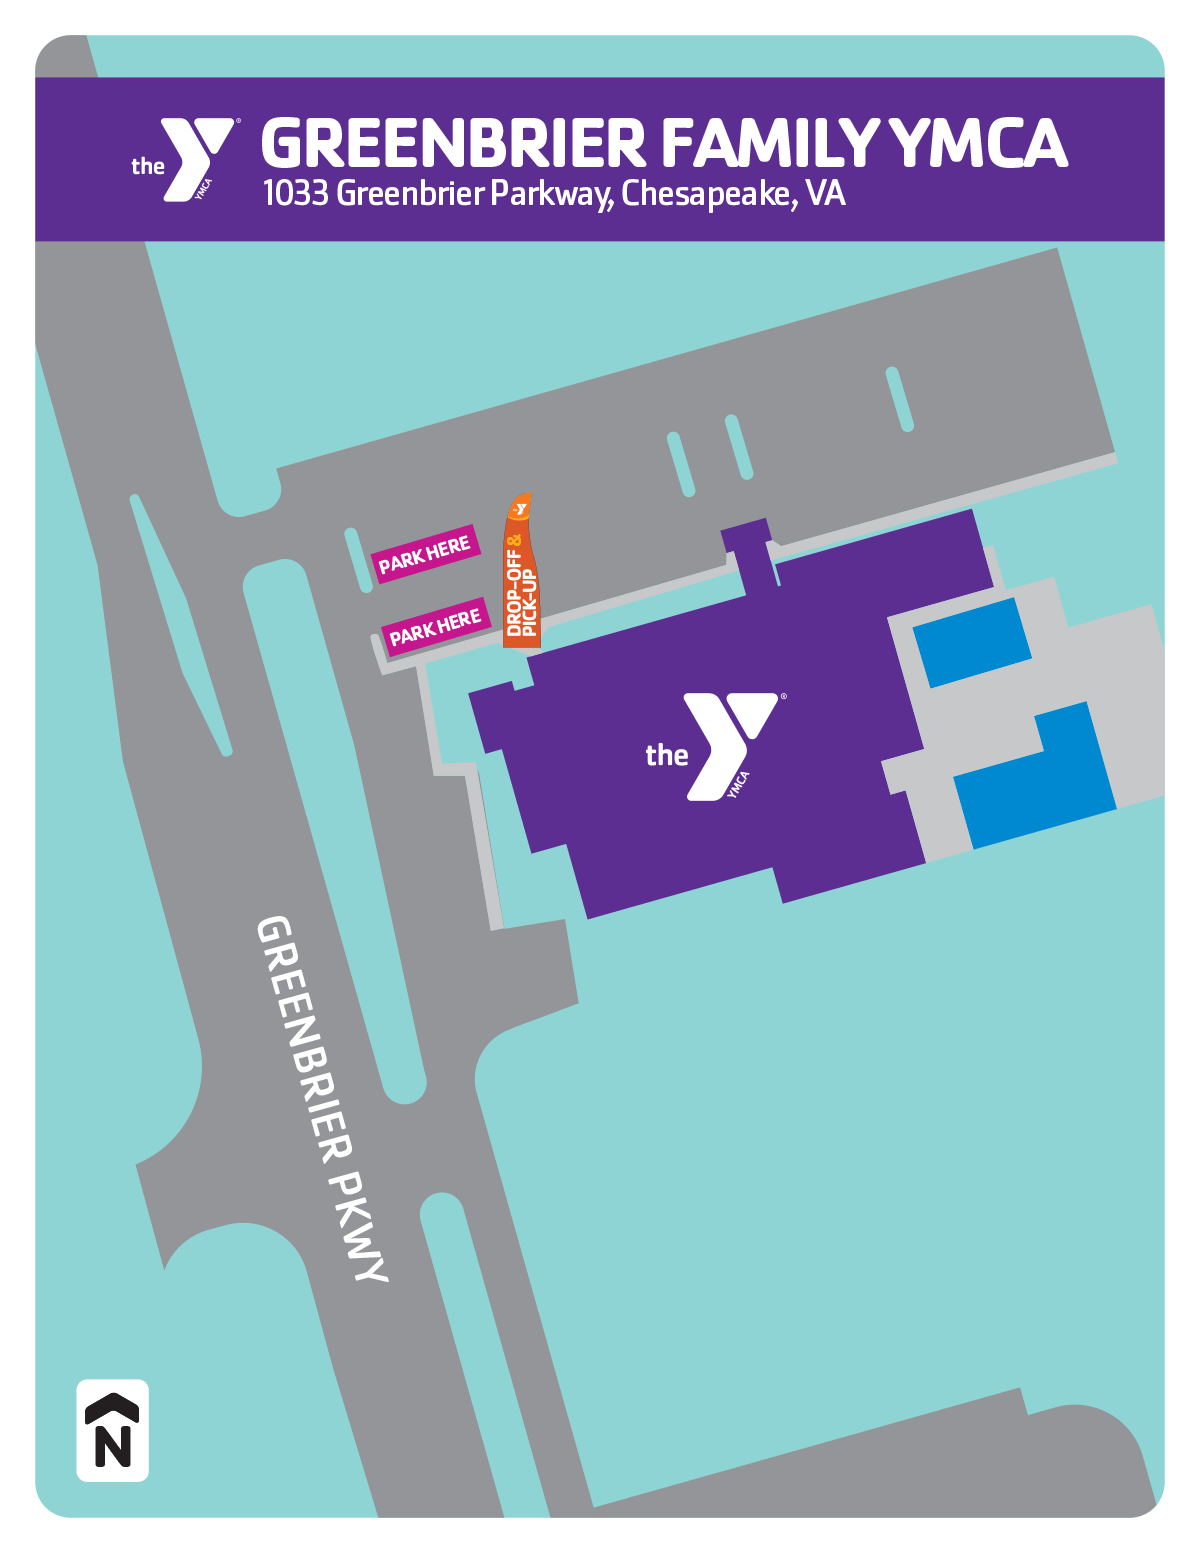 Summer camp drop-off & pick-up locations for the Greenbrier Family YMCA